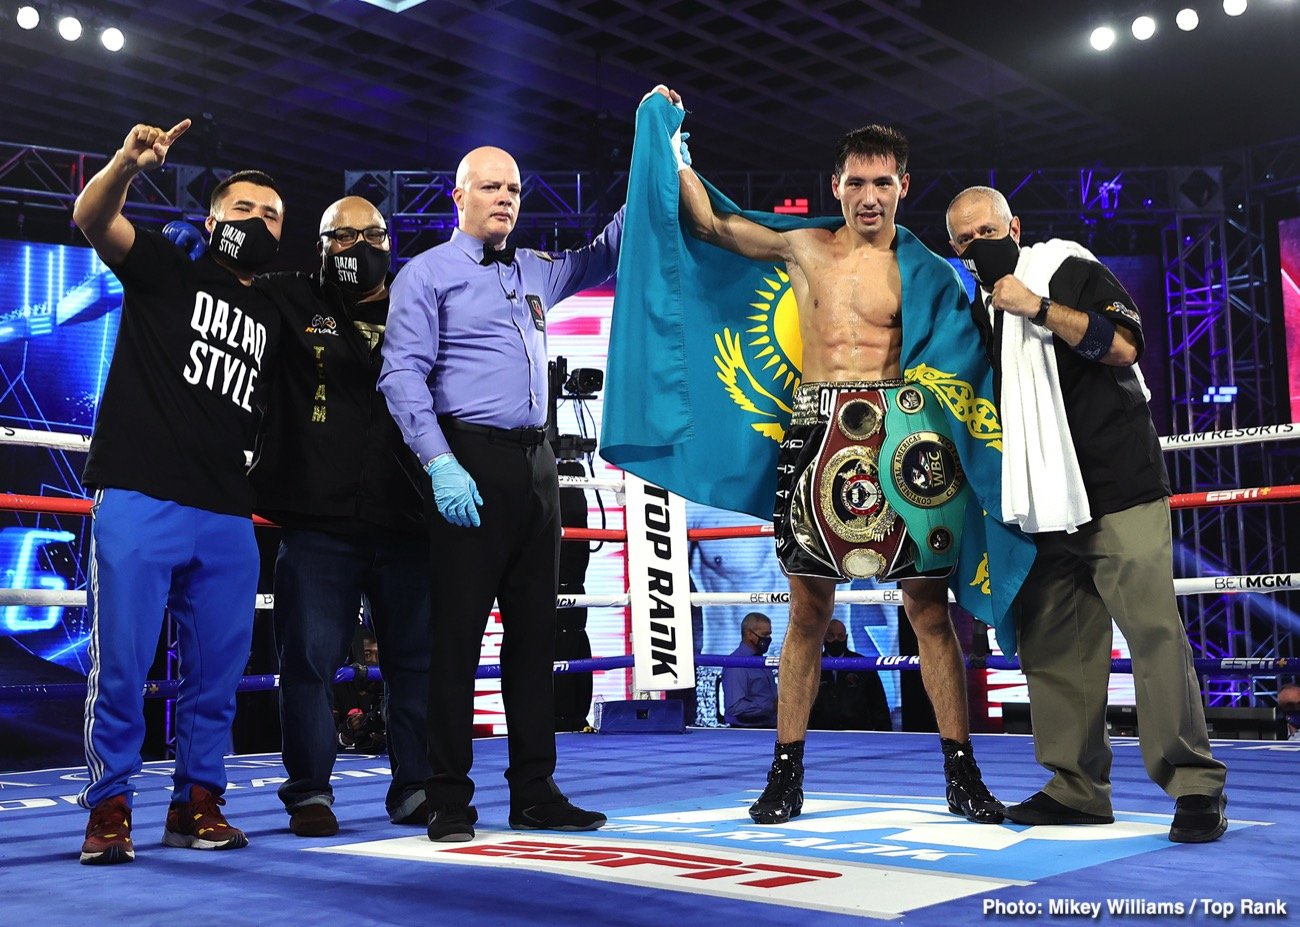 Image: Results / Photos: Navarrete Decisions Villa to Win Featherweight Title